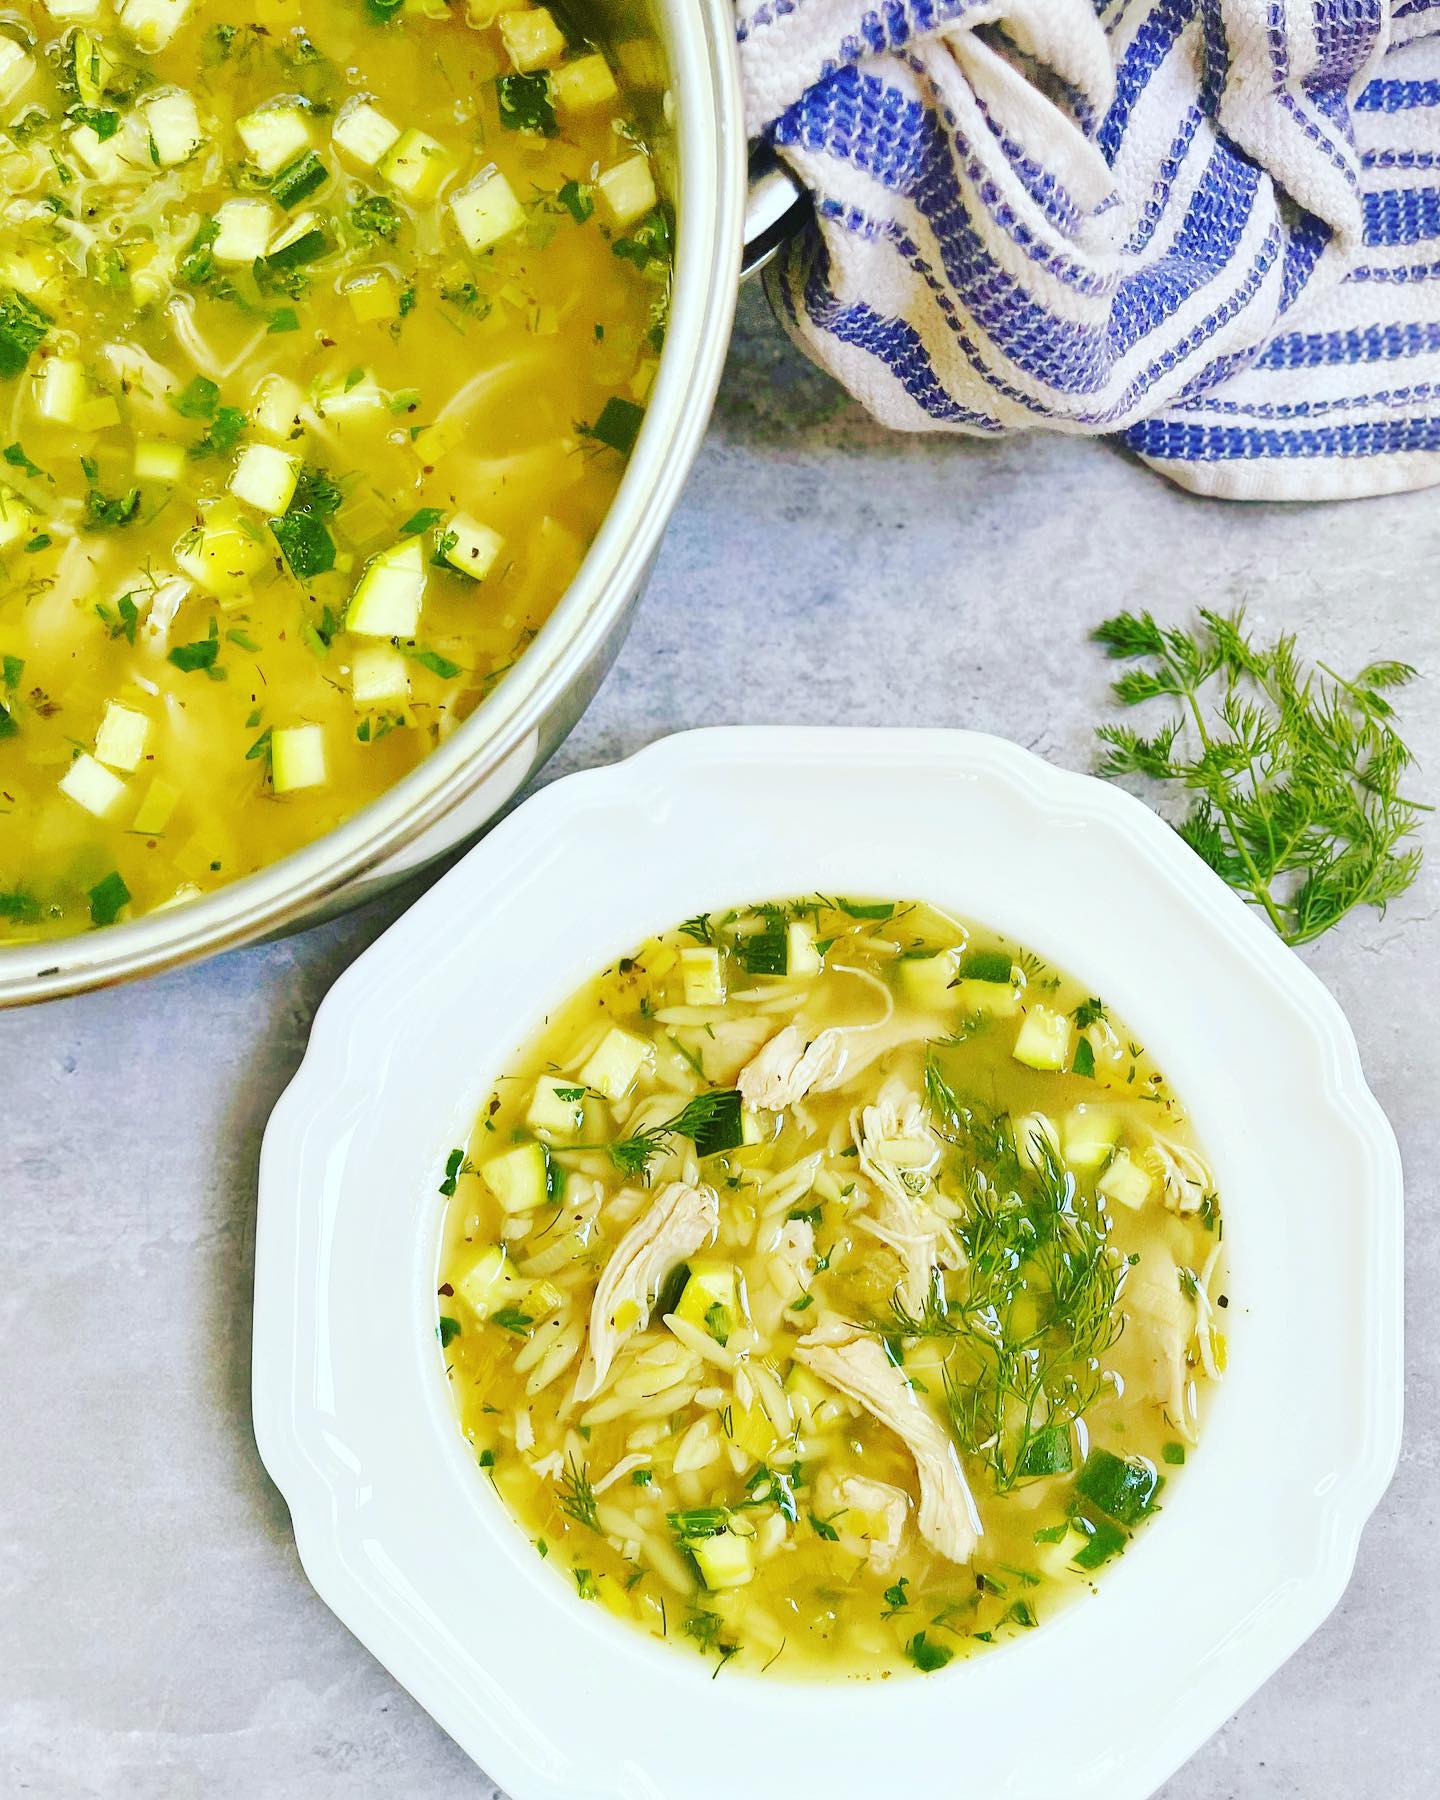 Lemony chicken and orzo soup - fresh citrus and herbs elevated this comforting soup and brightens it up on cold winter nights! Recipe @dinnerreinvented #orzo #pastarecipe #chickensoup #chickennoodlesoup #mediterraneandiet #mediterraneanfood #greekfood #dill #weeknightdinner #weeknightmeals #quickdinner #dinnerrecipes #dinnerideas #dinnerreinvented